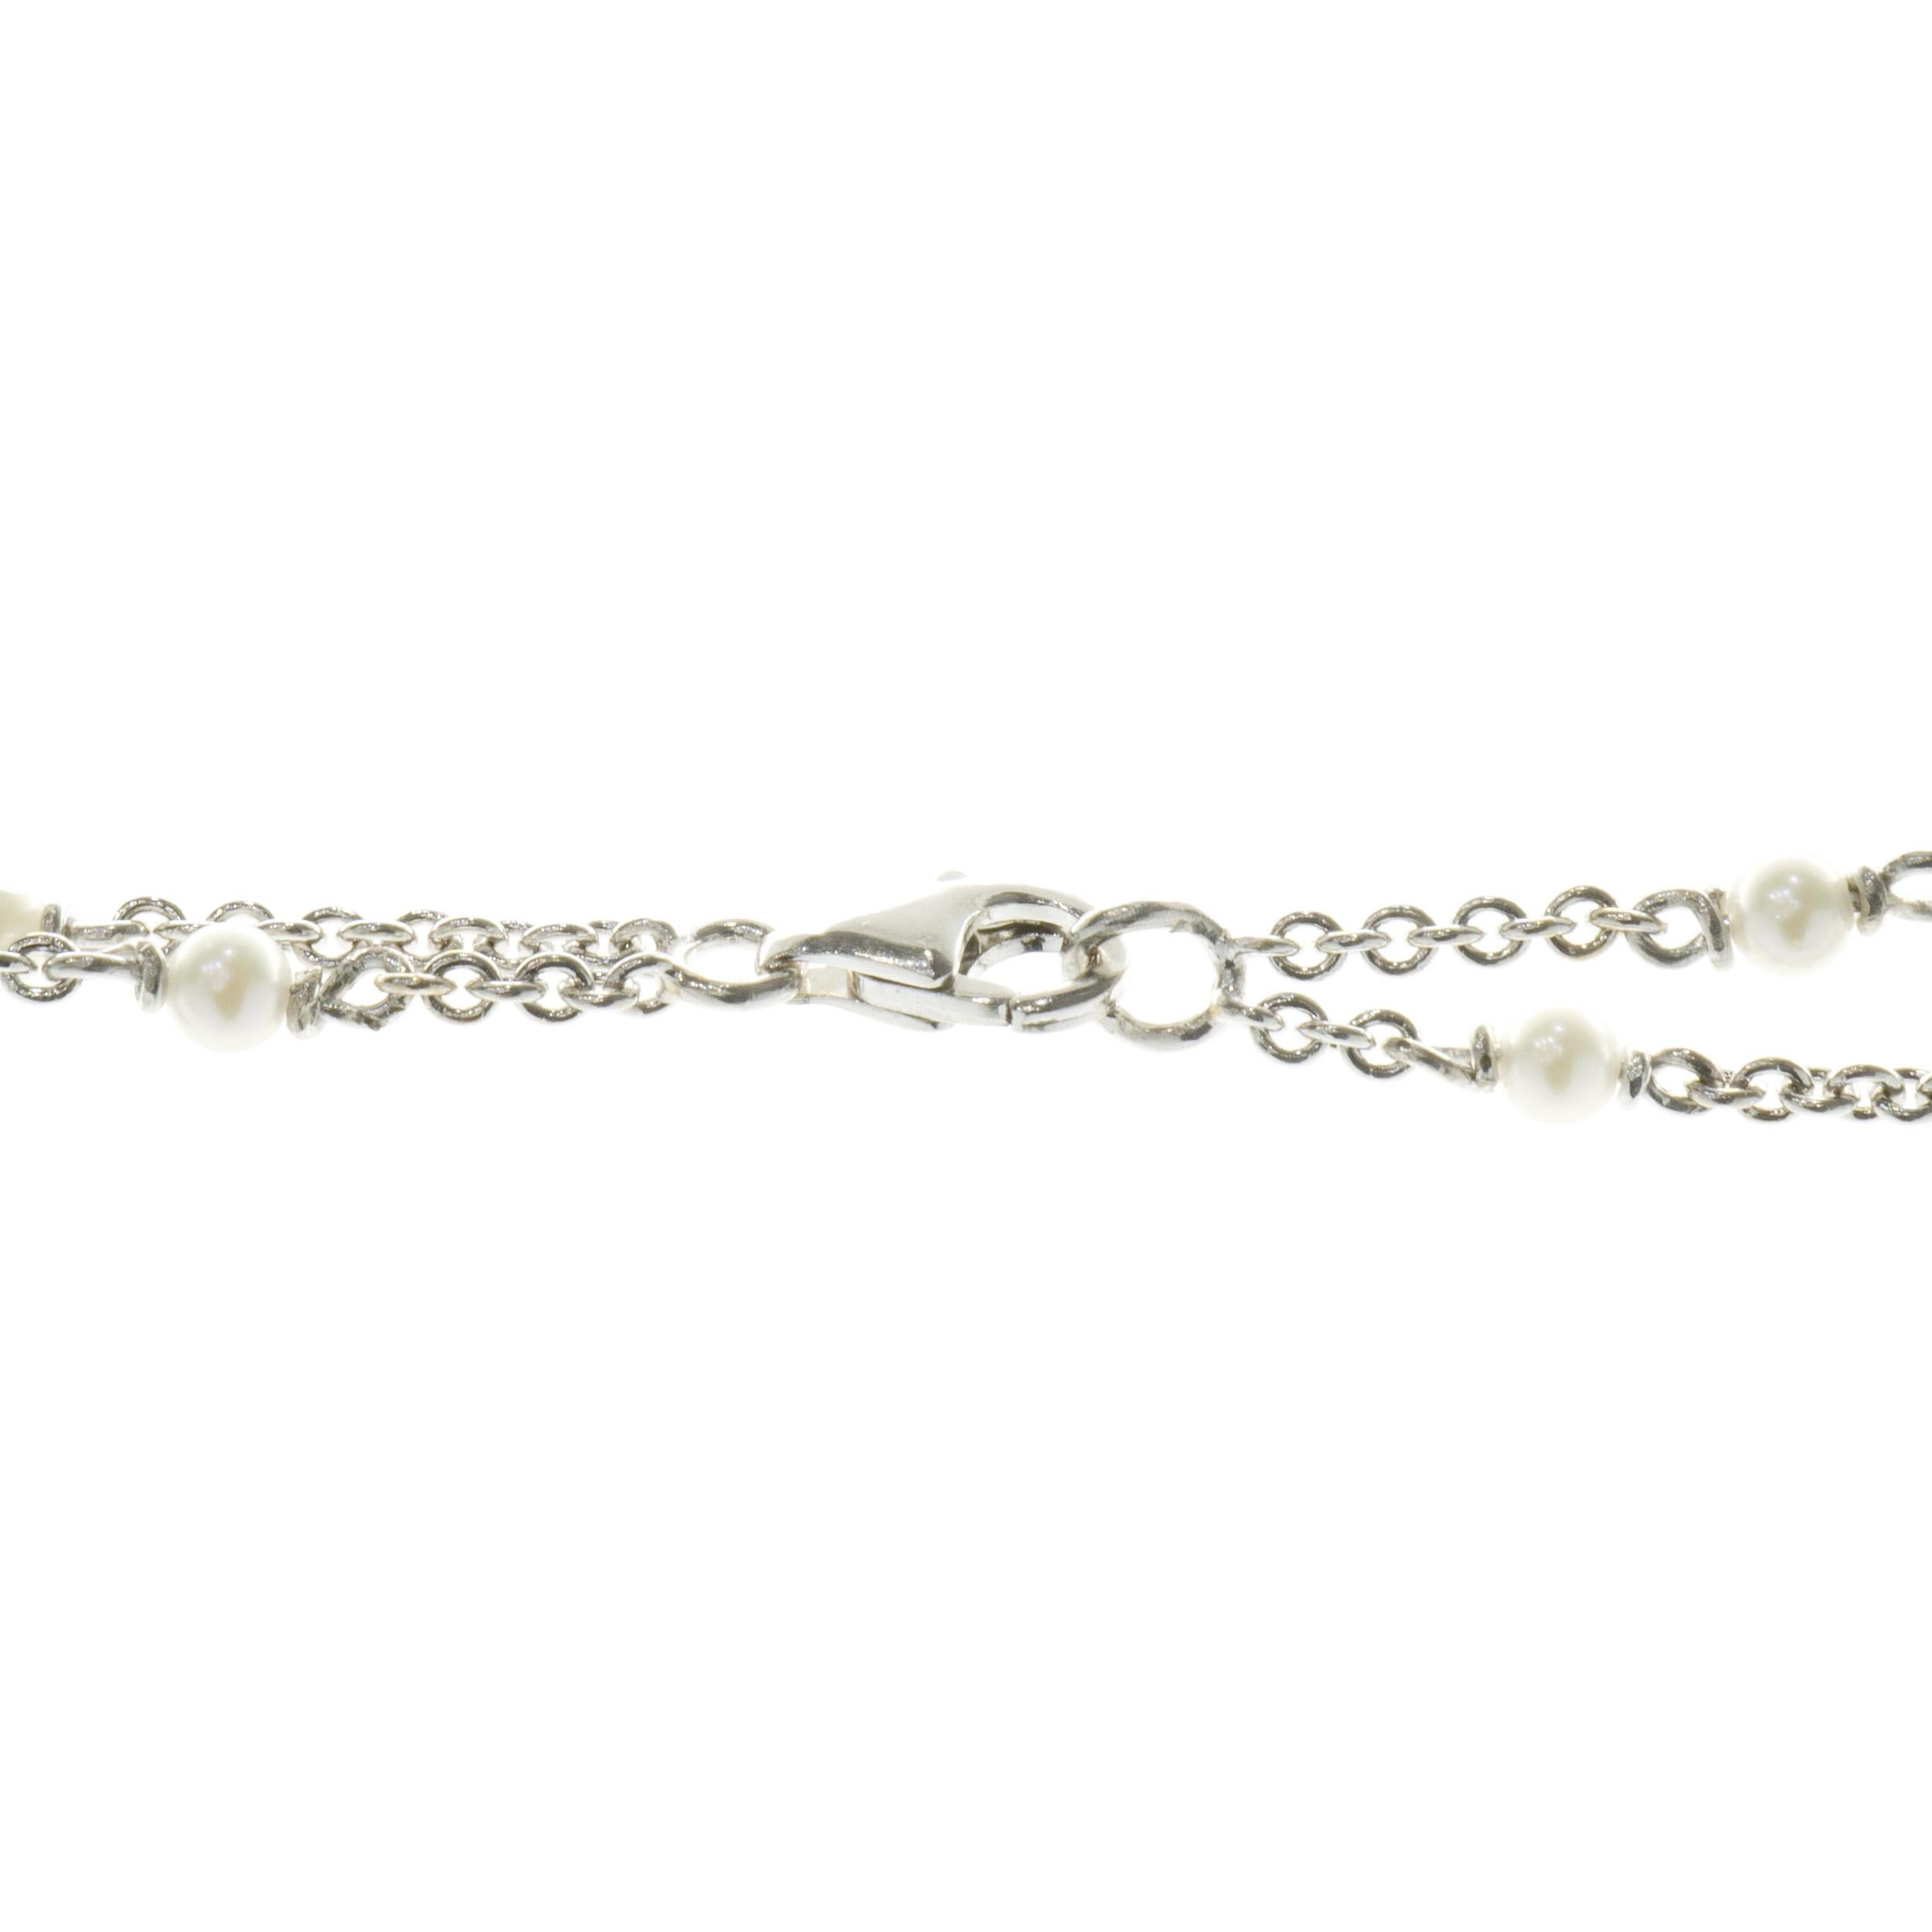 Designer: custom
Material: 18K white gold
Weight: 18.34 grams
Dimensions: necklace measures 26.25-inches